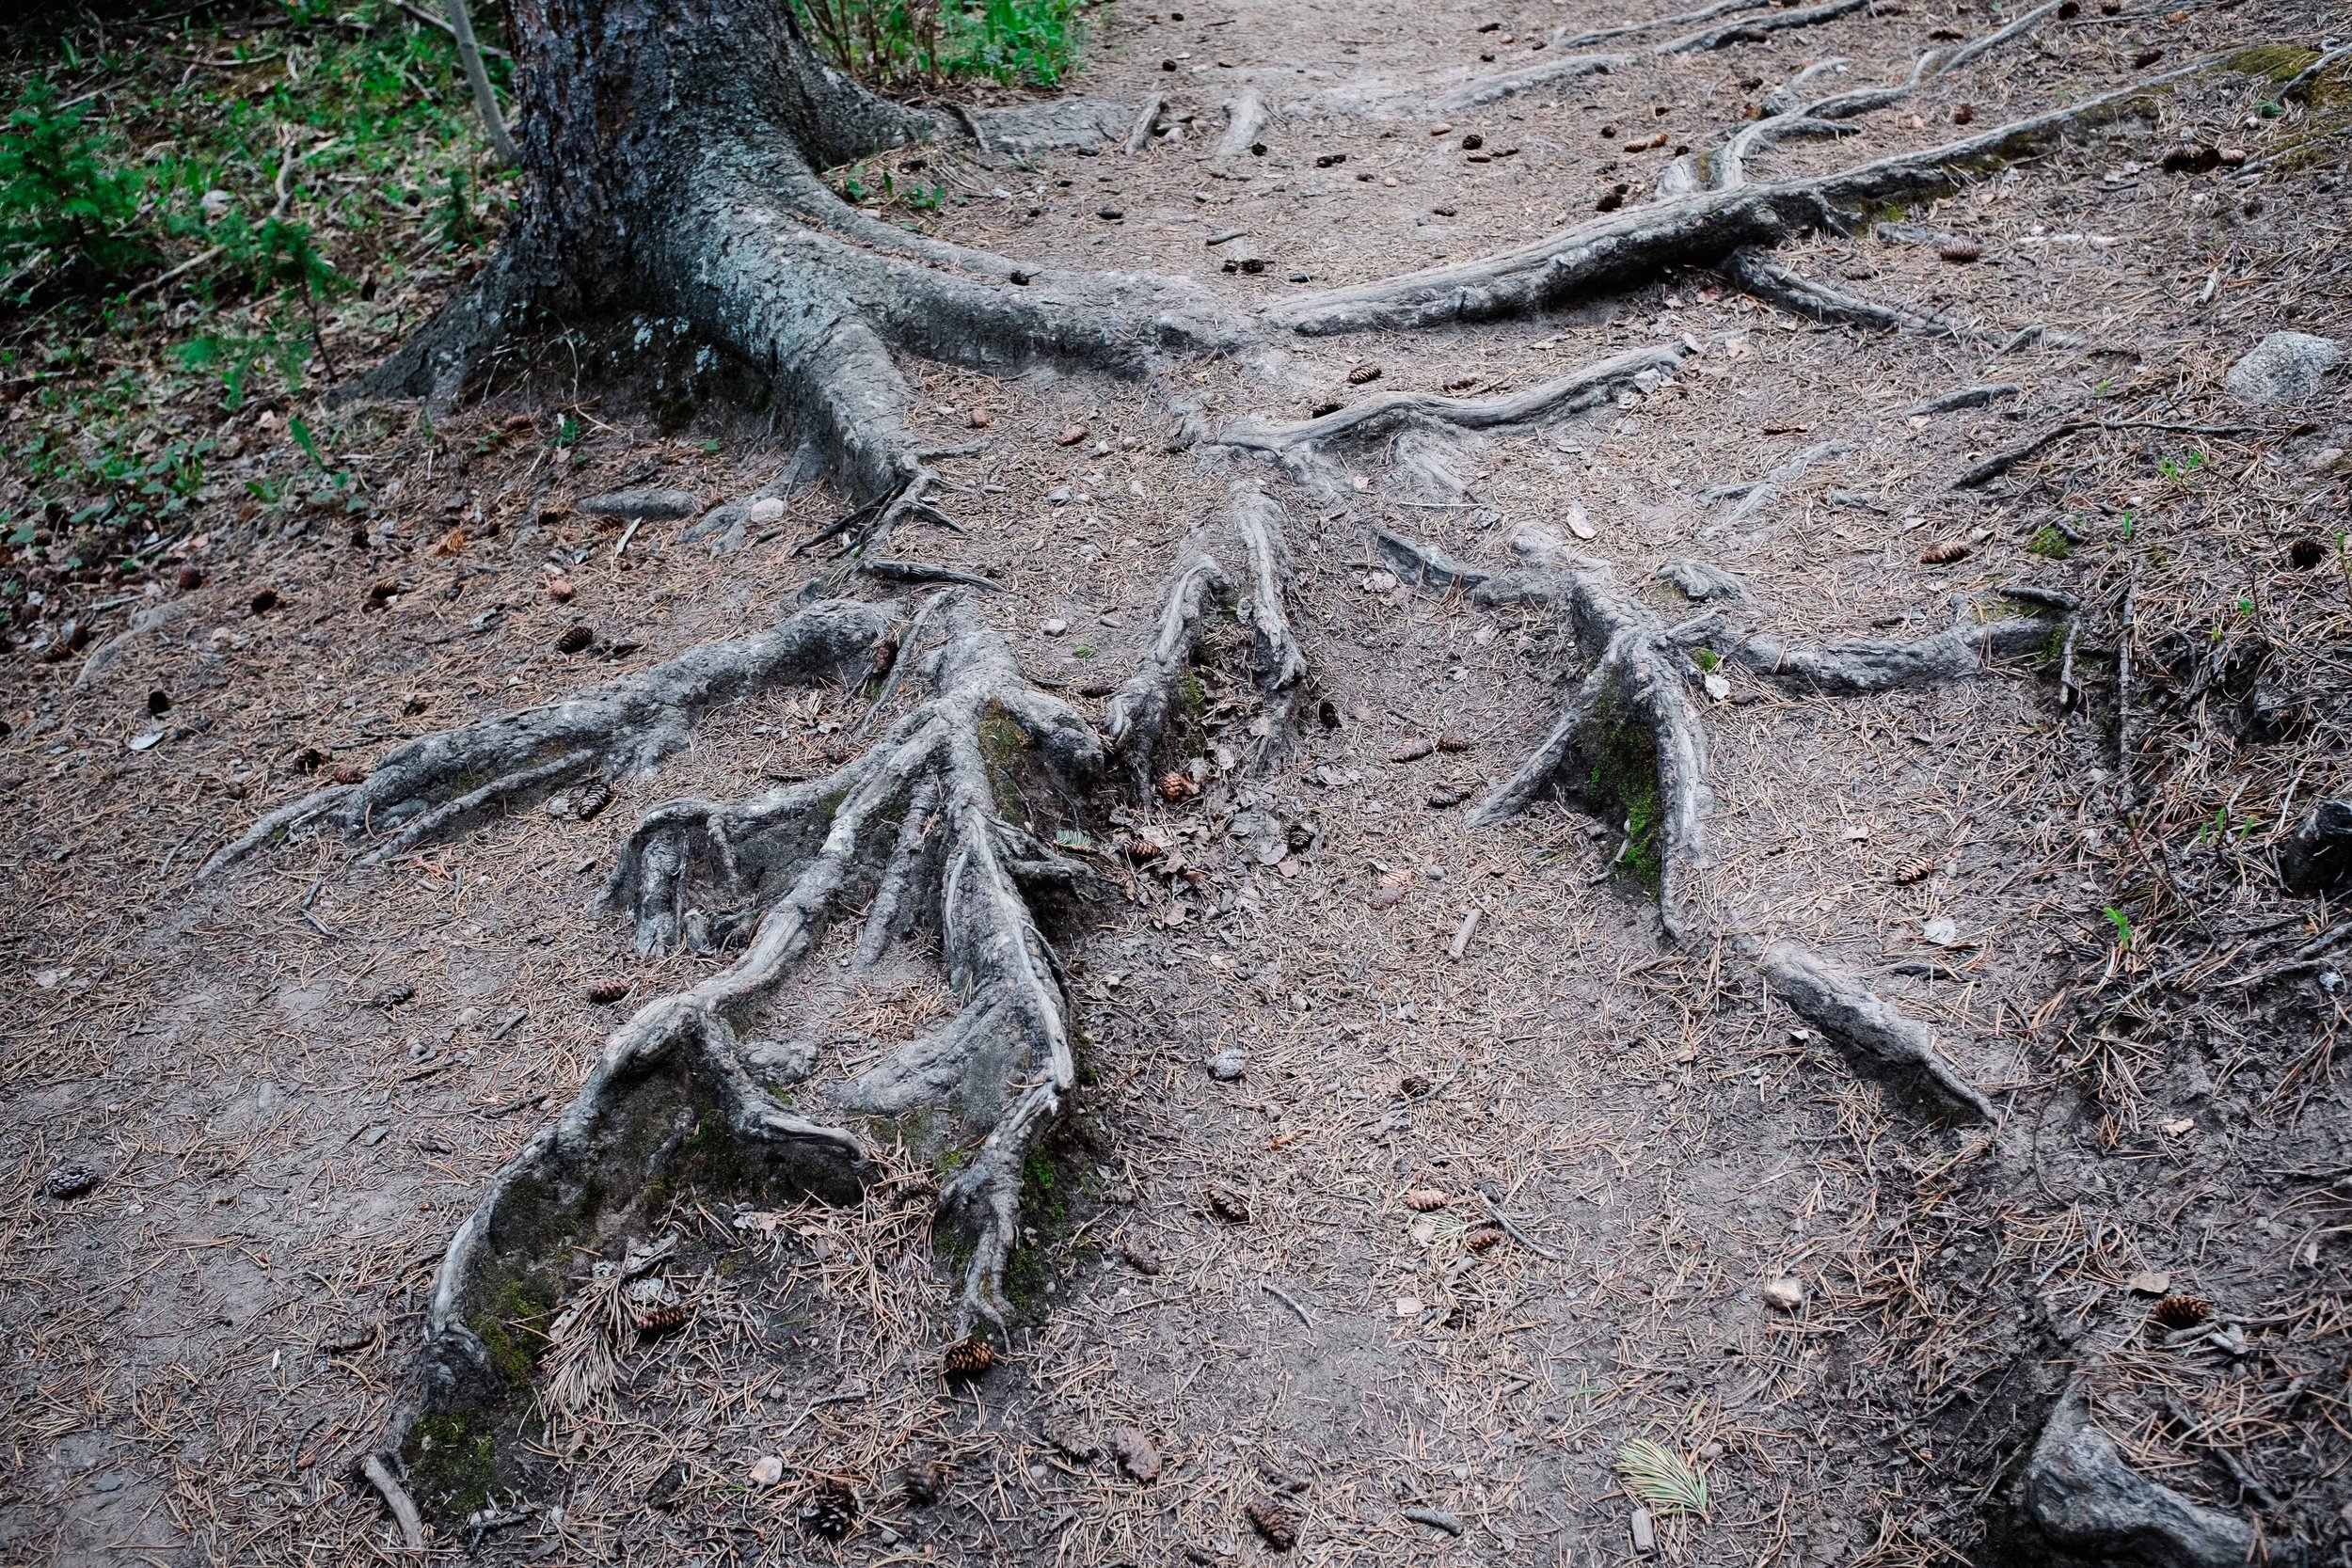 Forest Roots